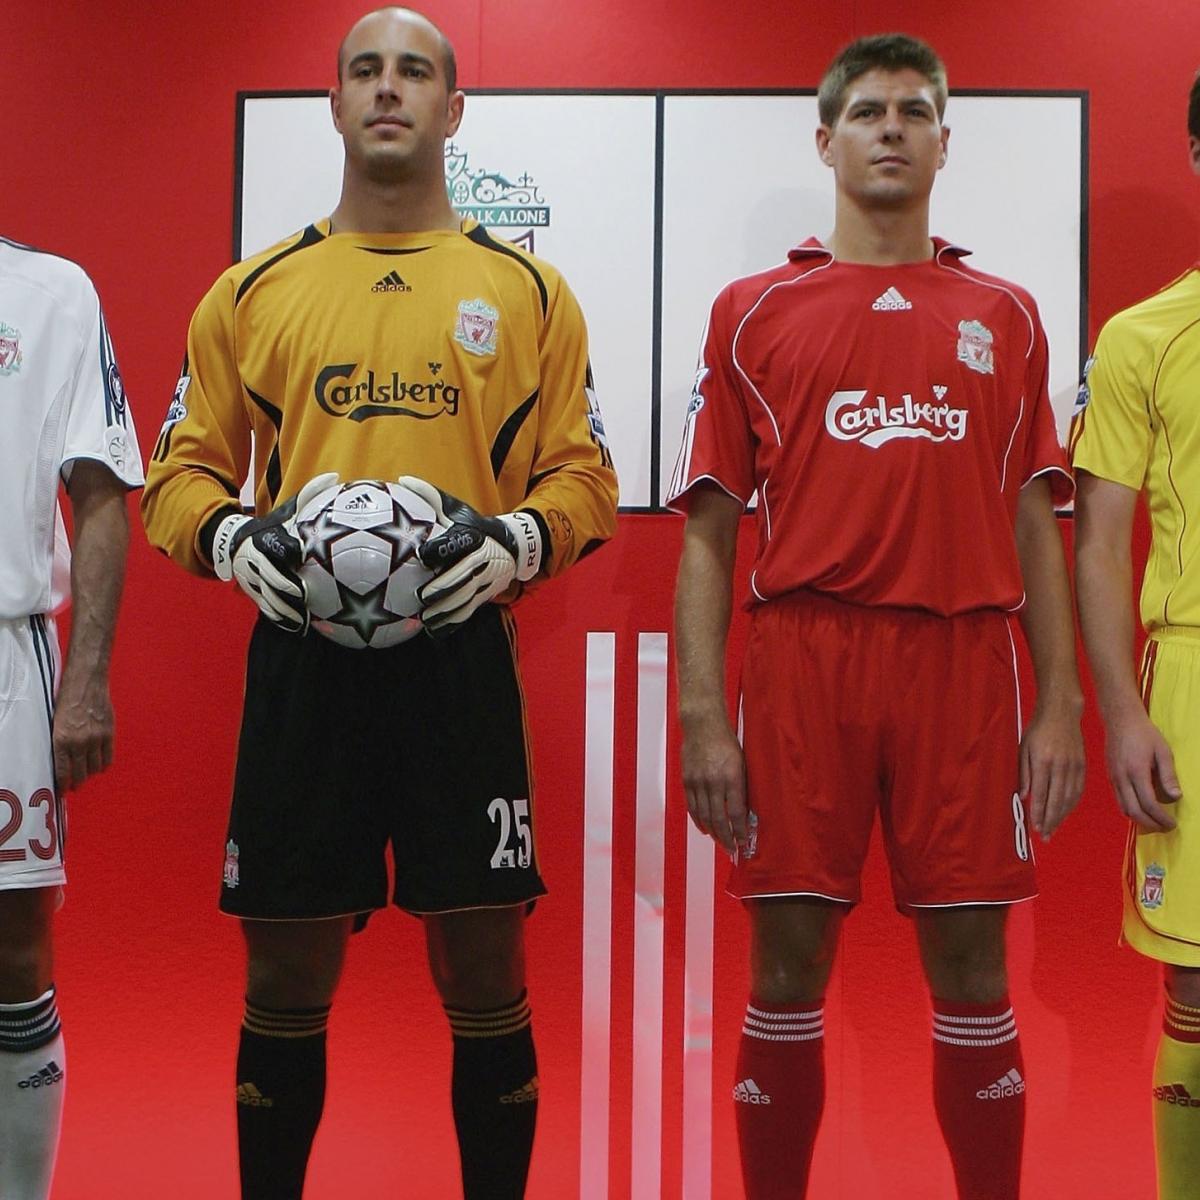 Gallery: Liverpool sport new away kit for first time - Liverpool FC